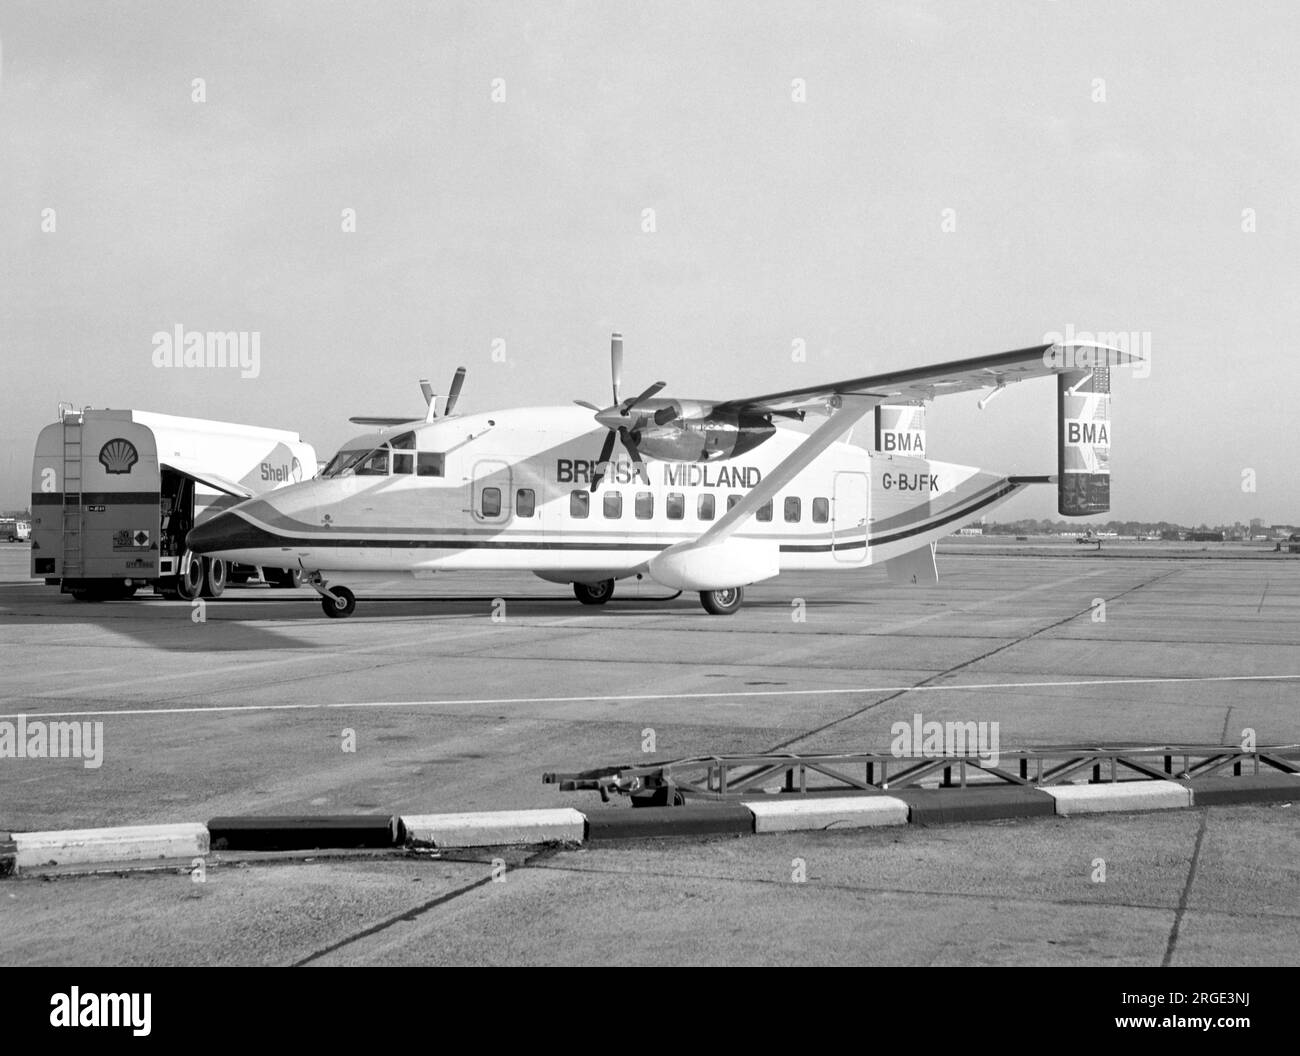 Short SD3-30-200 G-BJFK (msn SH.3077), of British Midland Airlines (operated by Inter-City airlines), at London Heathrow Airport. Stock Photo